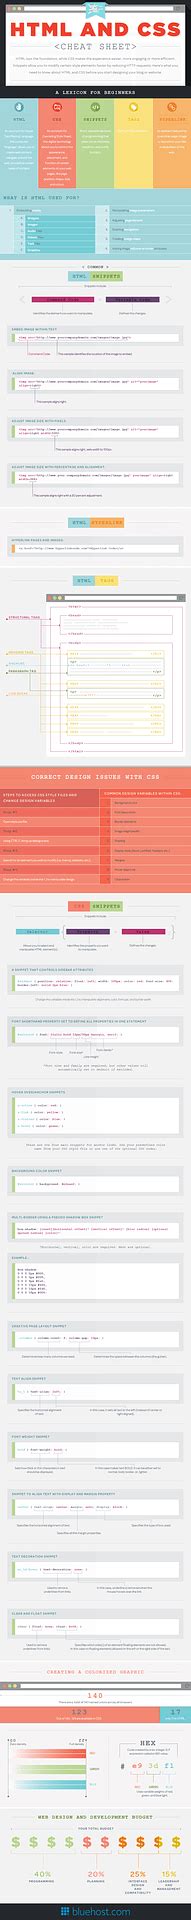 Html And Css Cheat Sheet Infographic